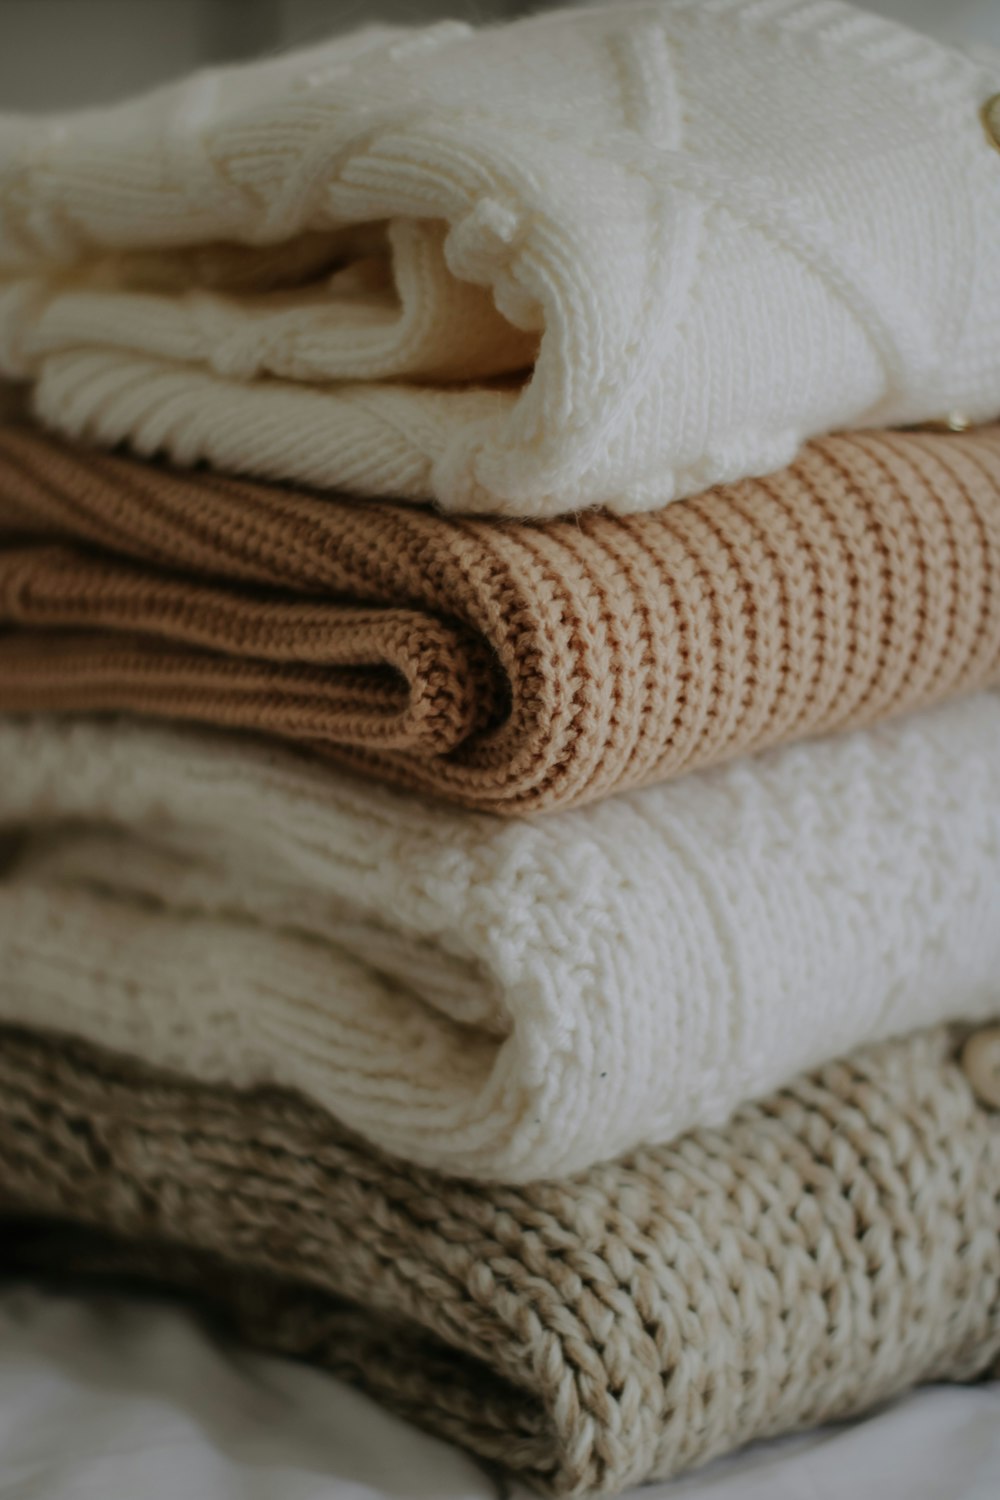 a close-up of some towels